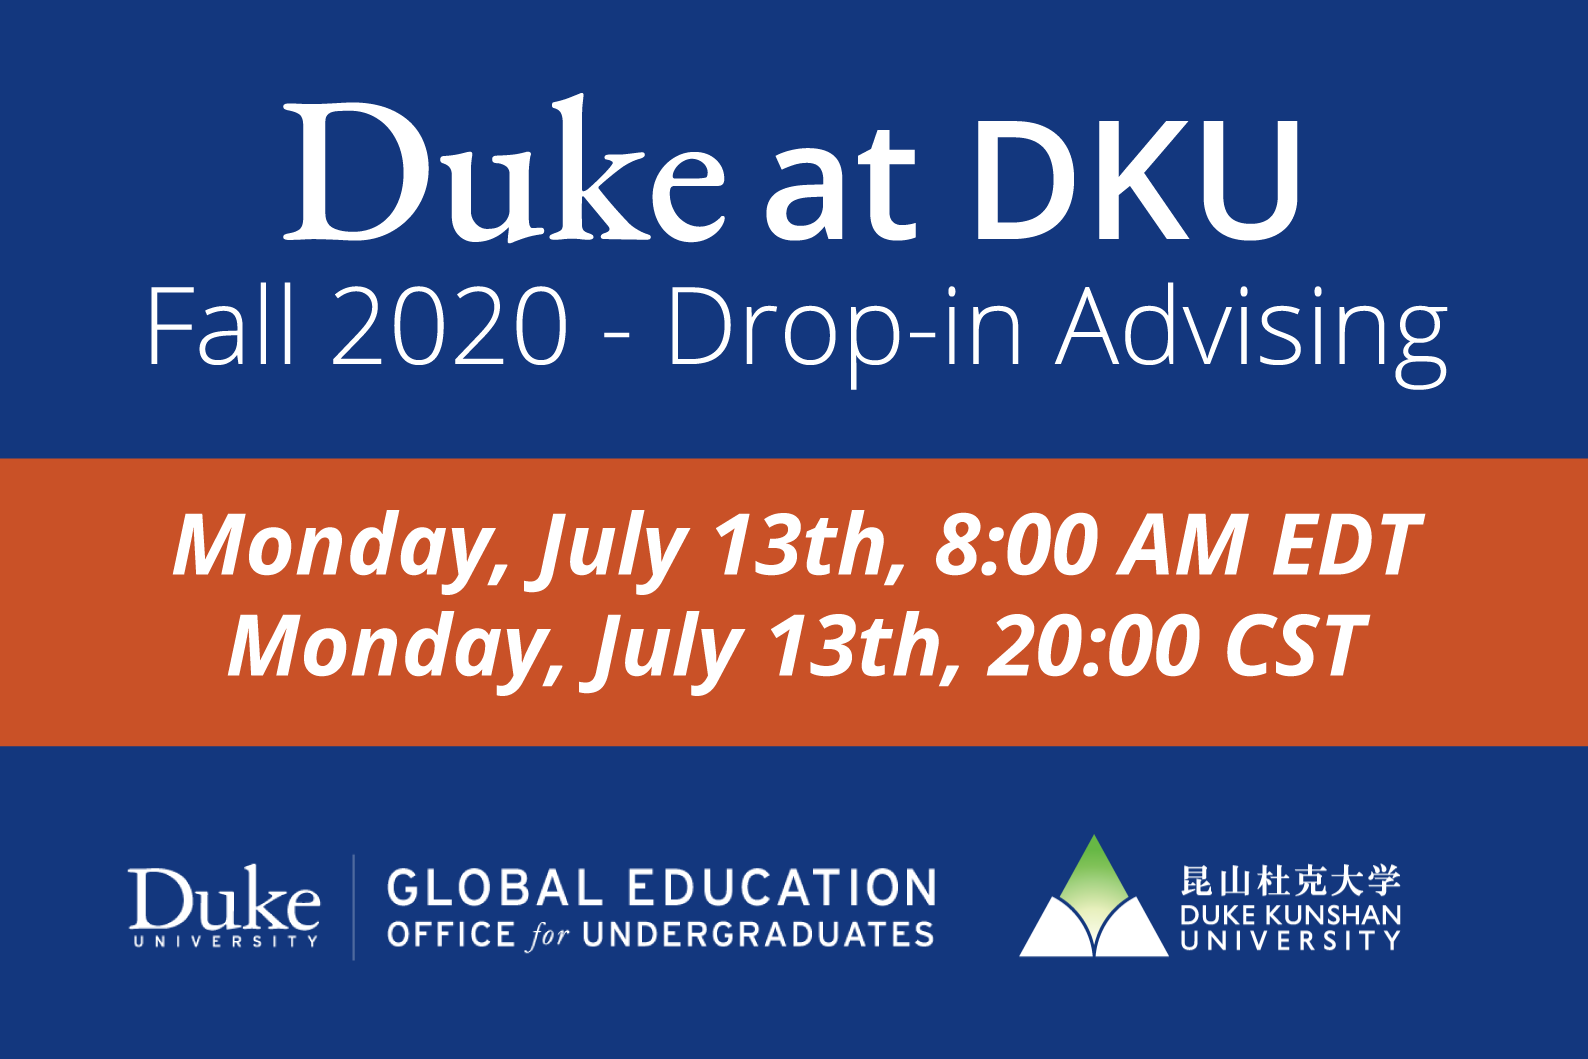 Duke at DKU Advising Session, Monday July 13th 8am EDT